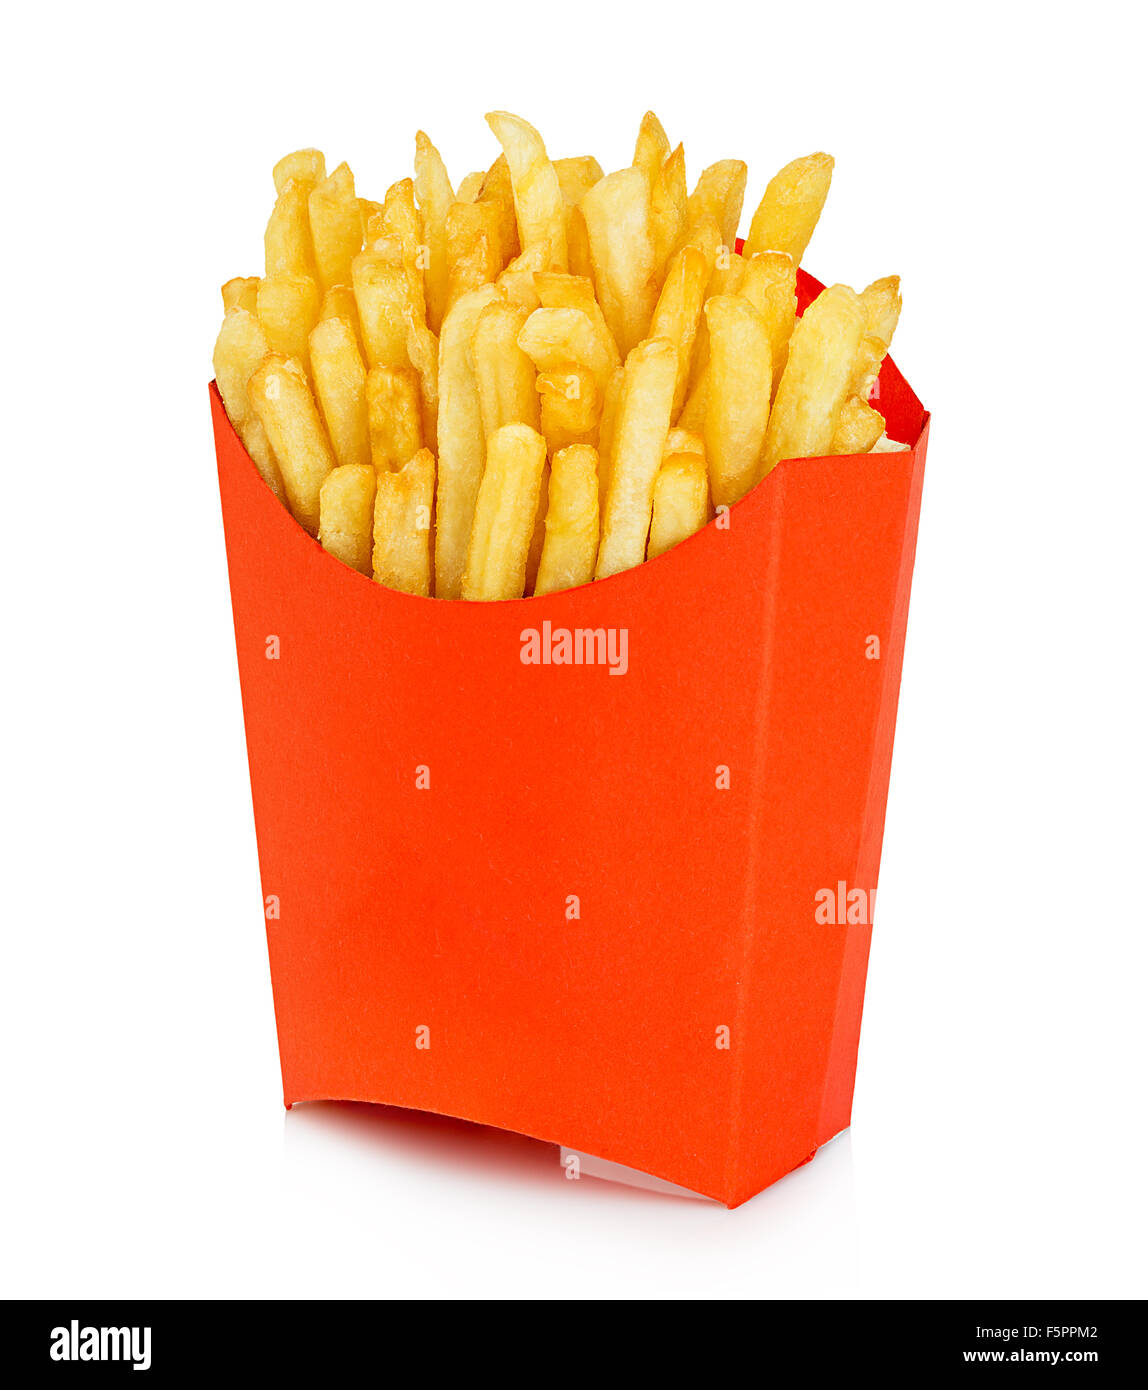 French Fries Potatoes In Paper Bag. Isolated On White Background